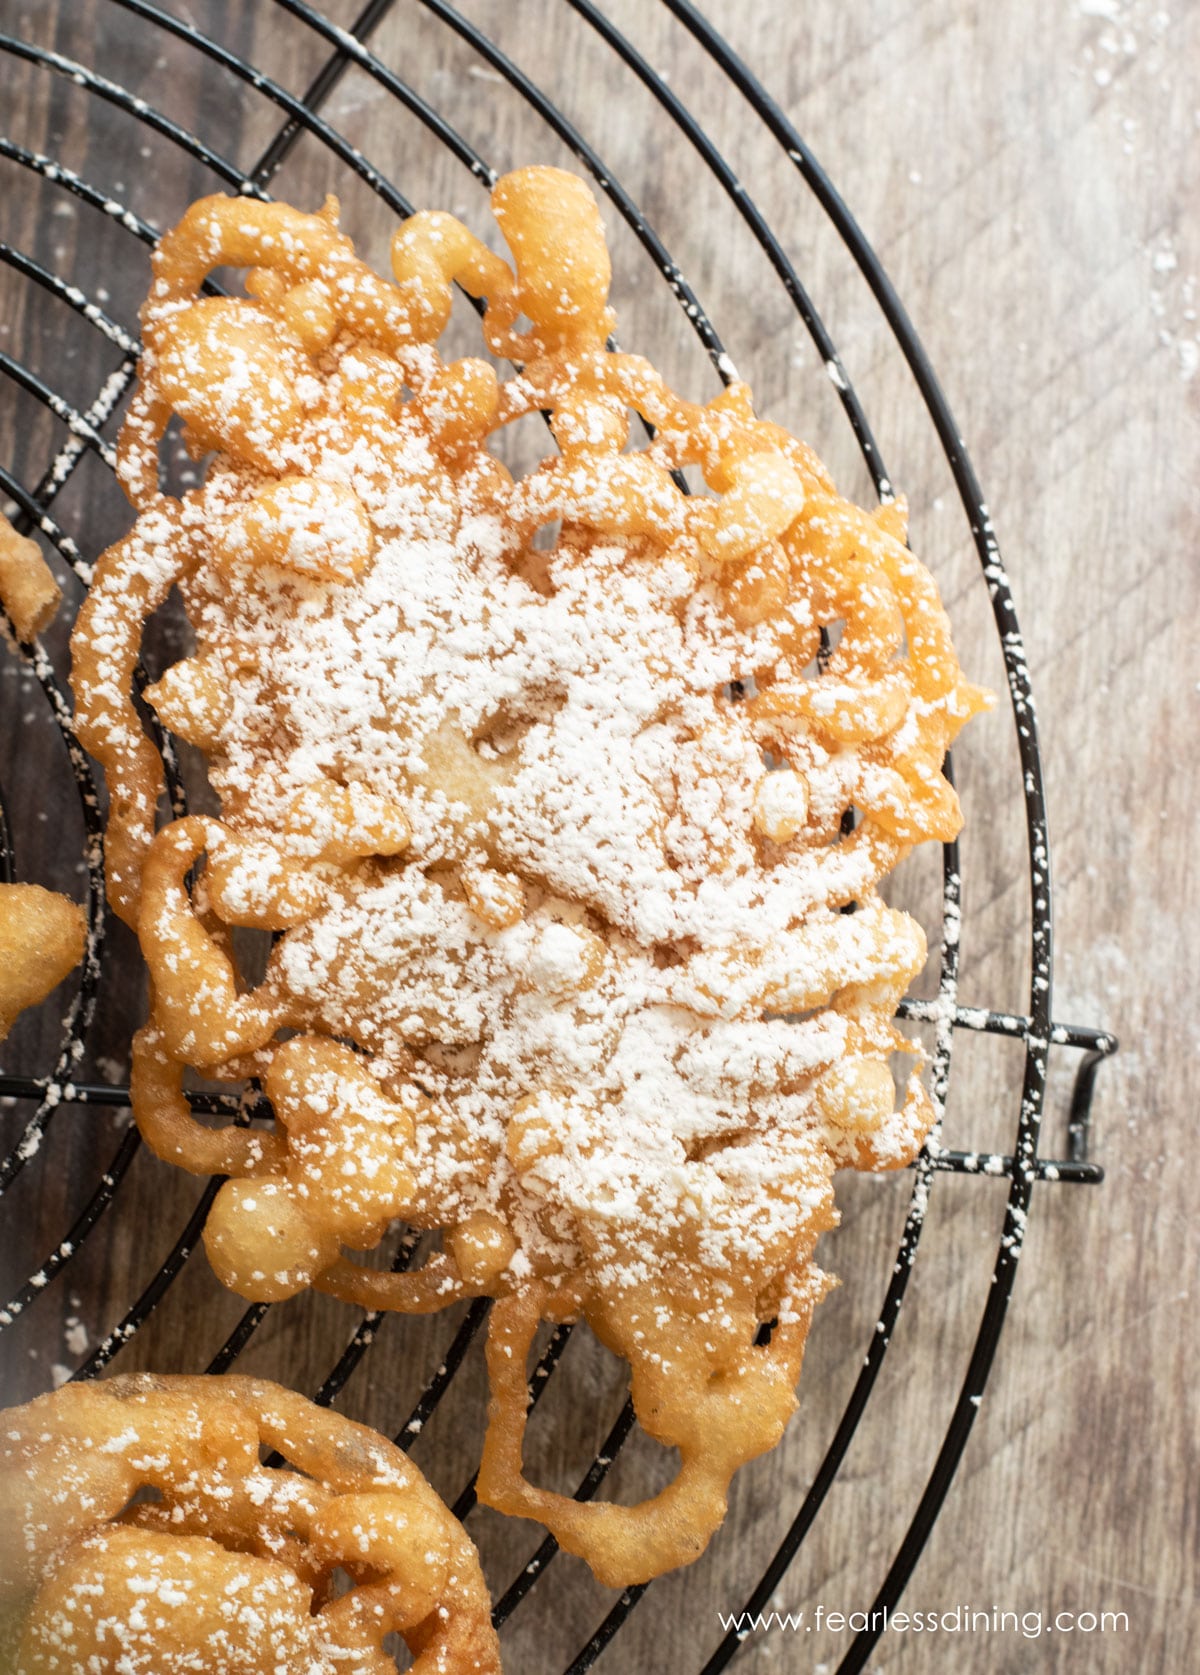 A close up of a fried funnel cake dusted with powdered sugar.